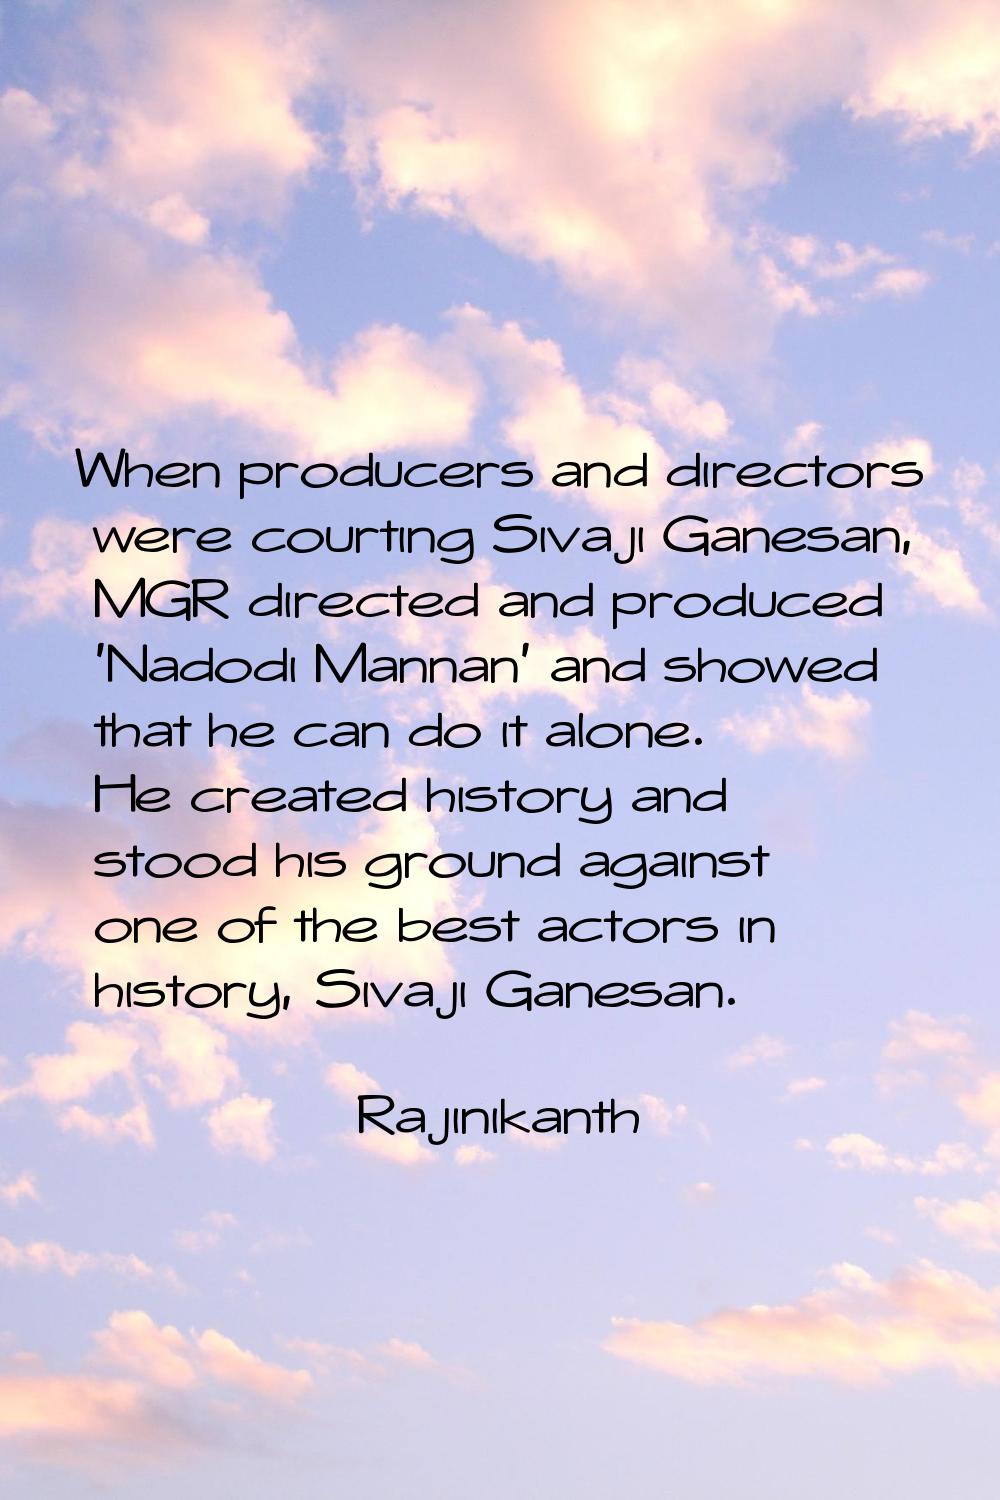 When producers and directors were courting Sivaji Ganesan, MGR directed and produced 'Nadodi Mannan